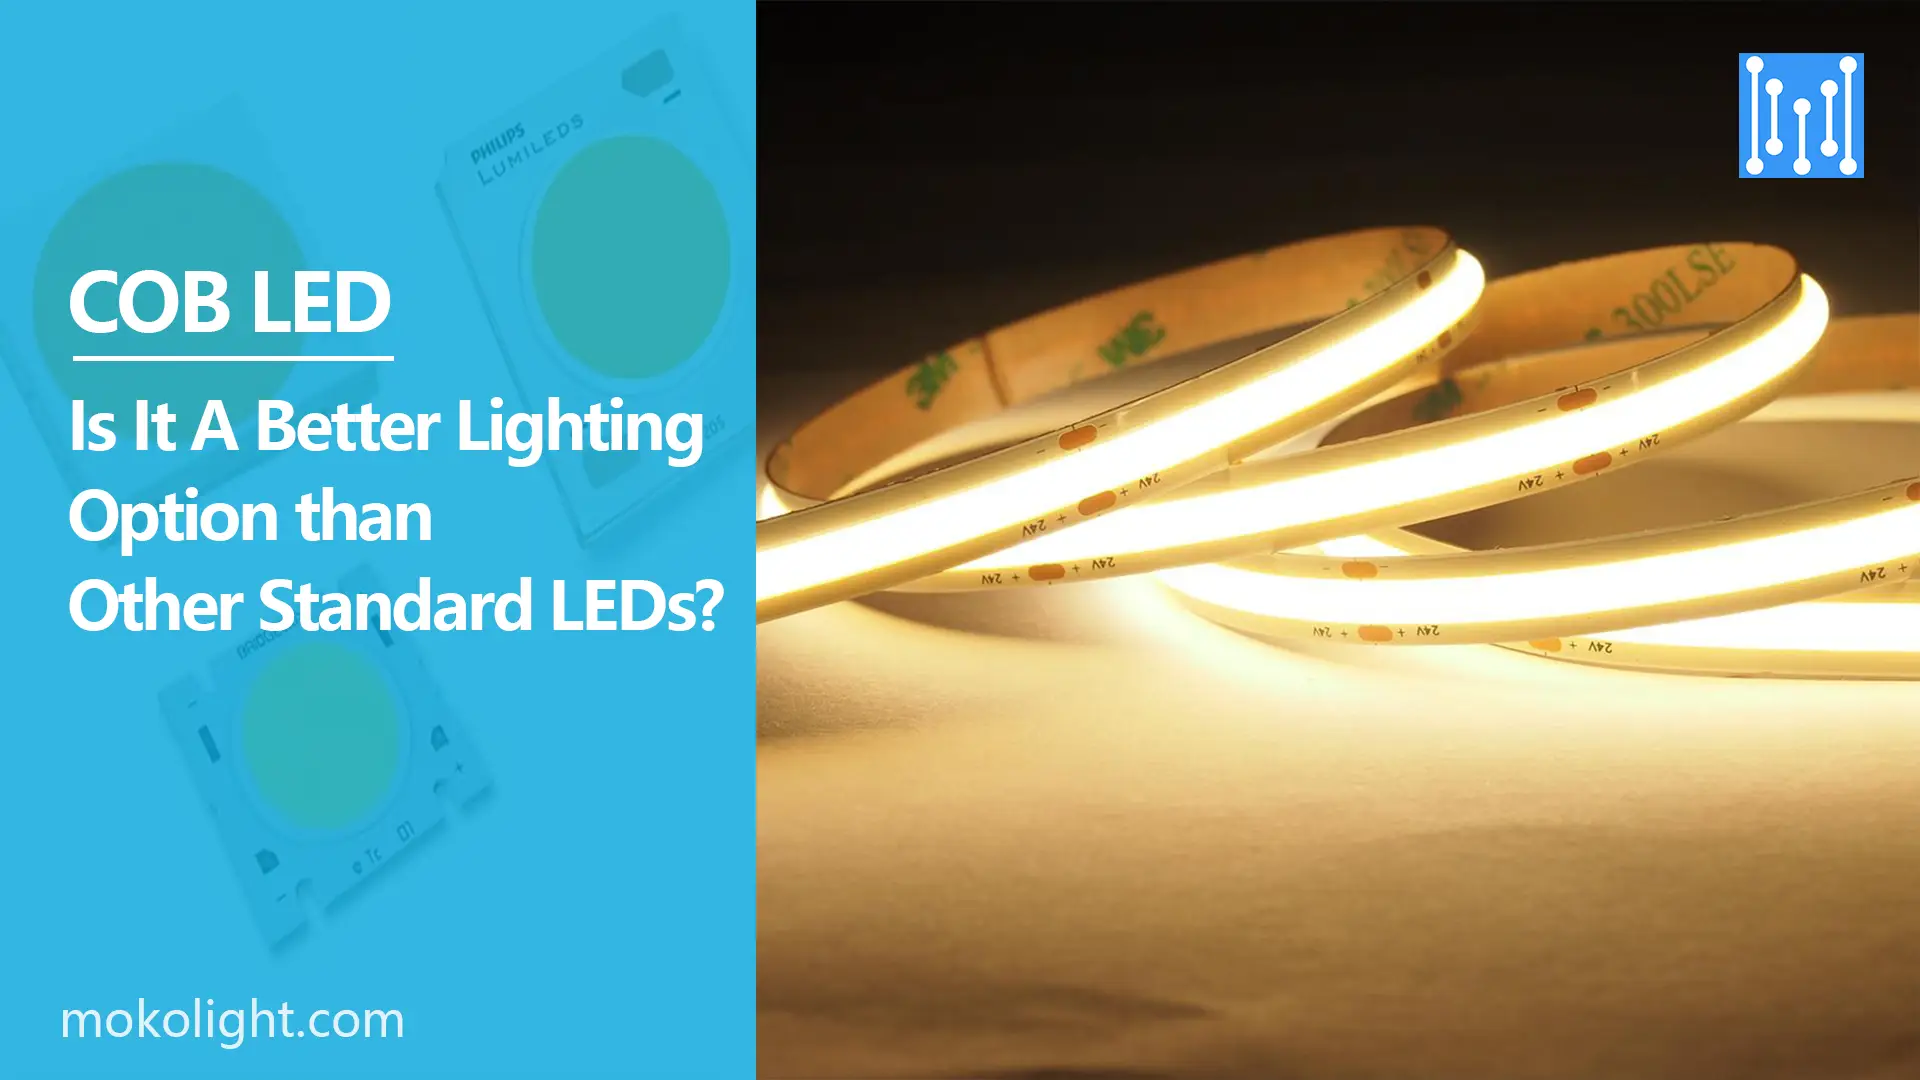 COB LED - Is It A Better Lighting Option than Other Standard LEDs